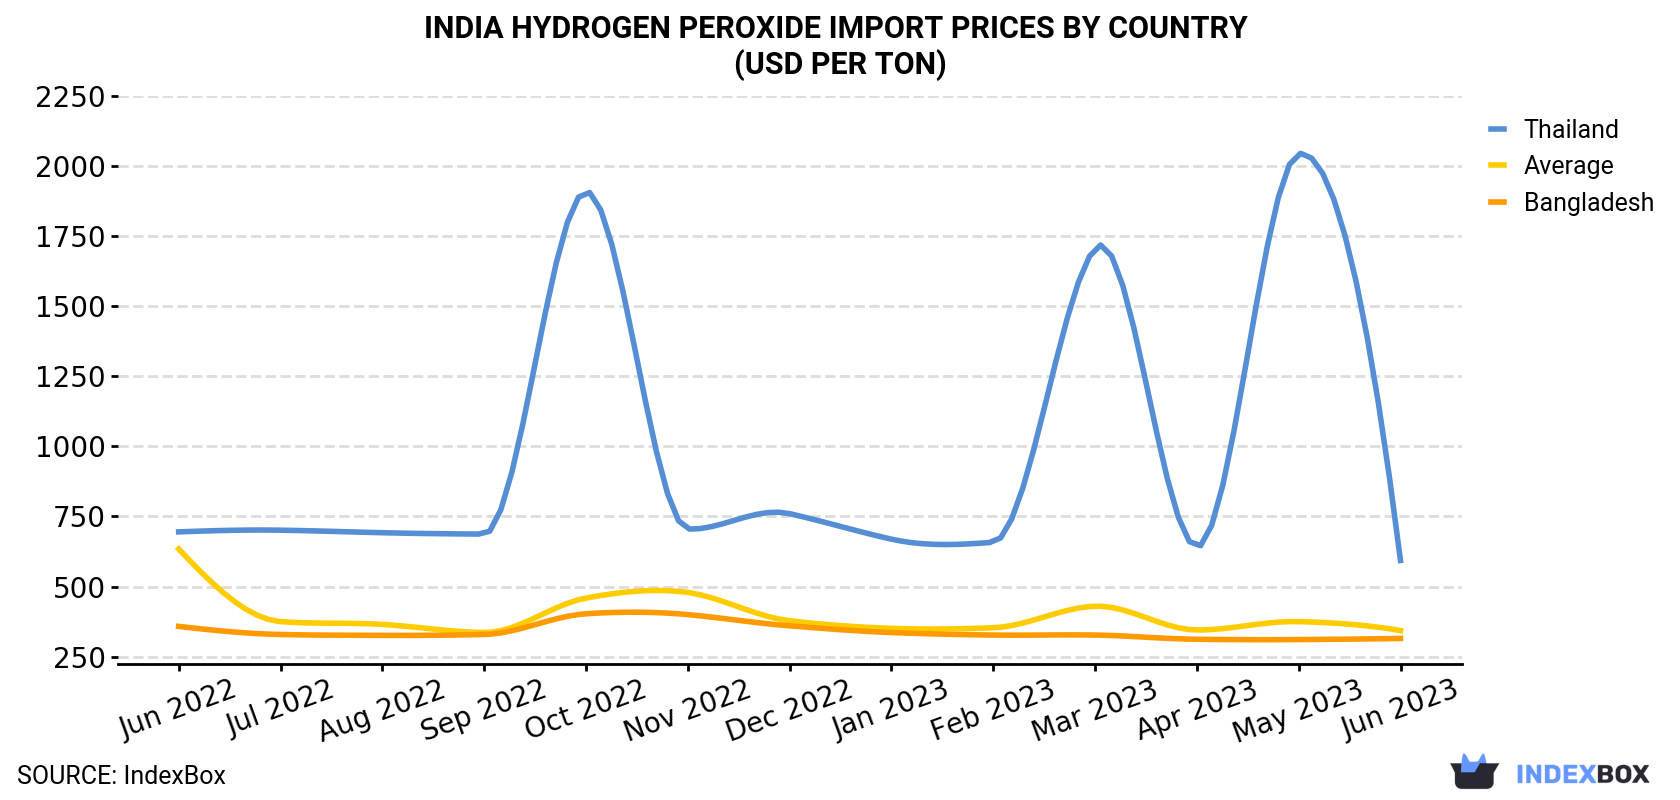 India Hydrogen Peroxide Import Prices By Country (USD Per Ton)